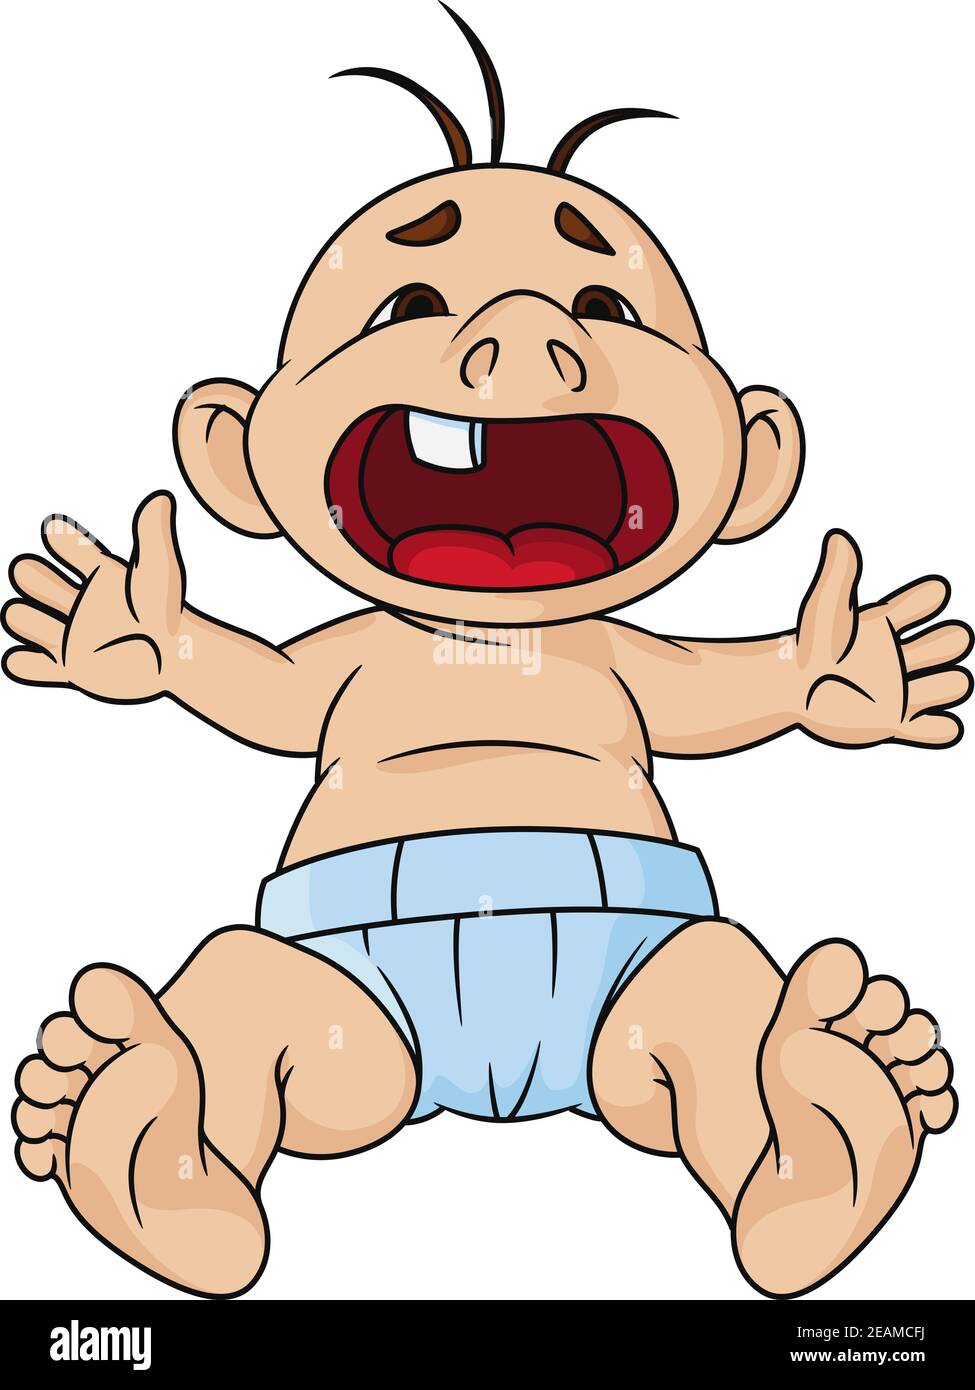 Screaming baby having a temper tantrum with a wide open mouth with a single tooth, cartoon style Stock Vector